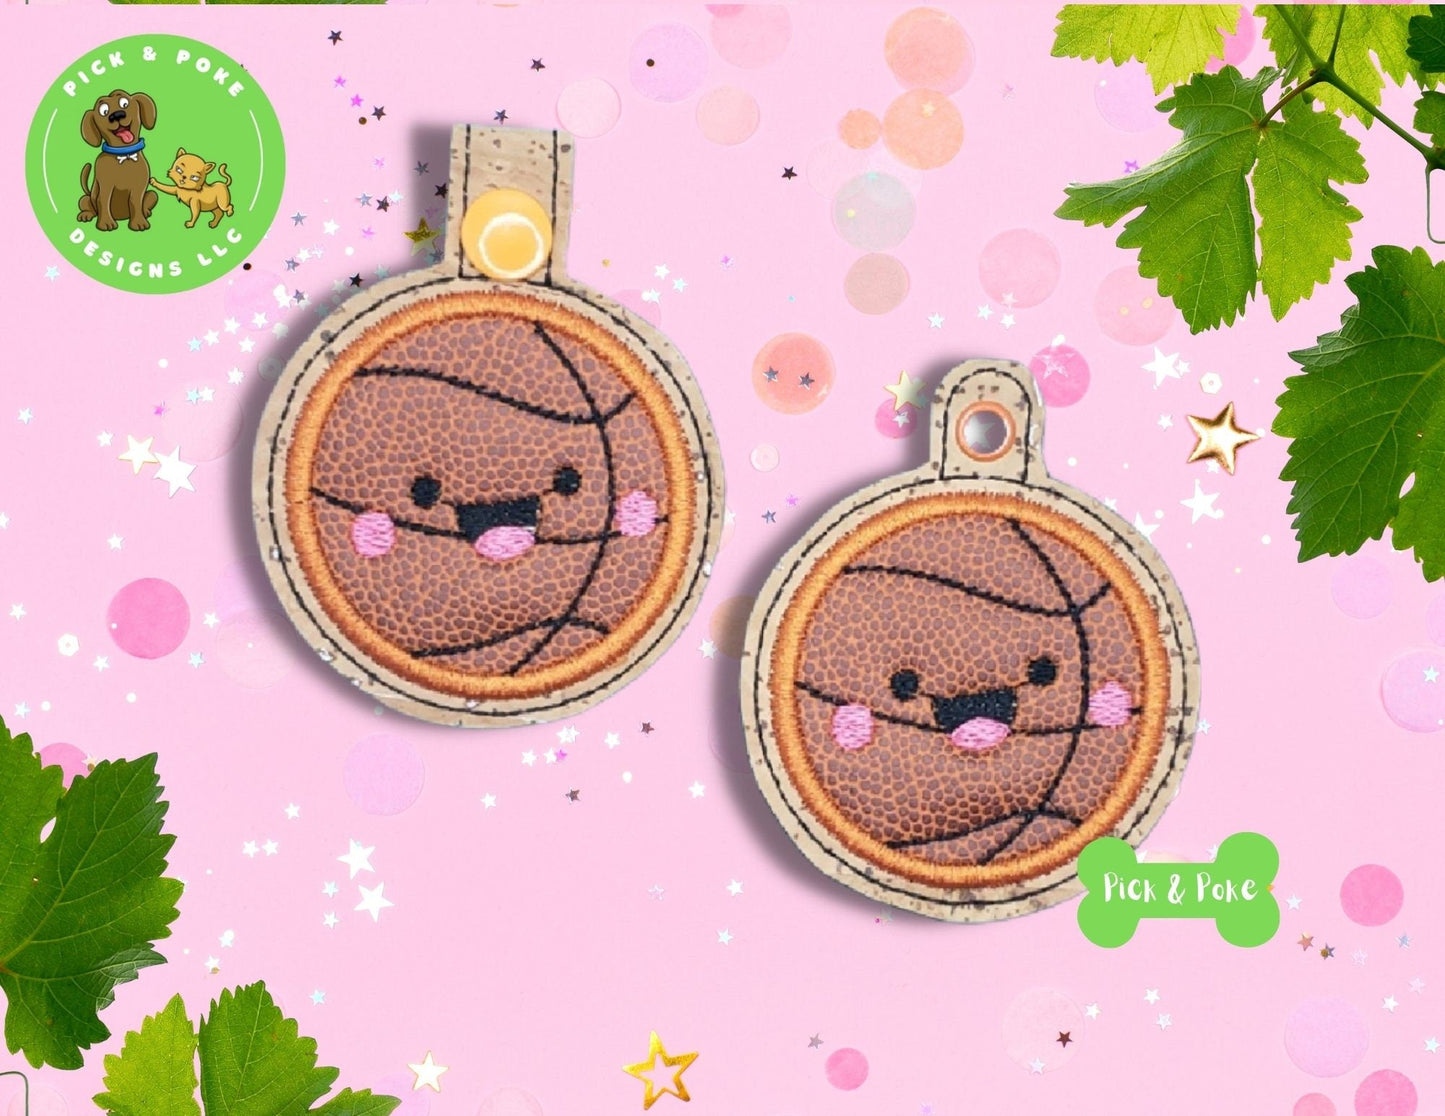 In the Hoop Embroidery Project Cute Kawaii Basketball Applique Snap Tab Eyelet Key Fob / Gift Tag / Digital File / Instant DOWNLOAD / ITHPick and Poke Designs